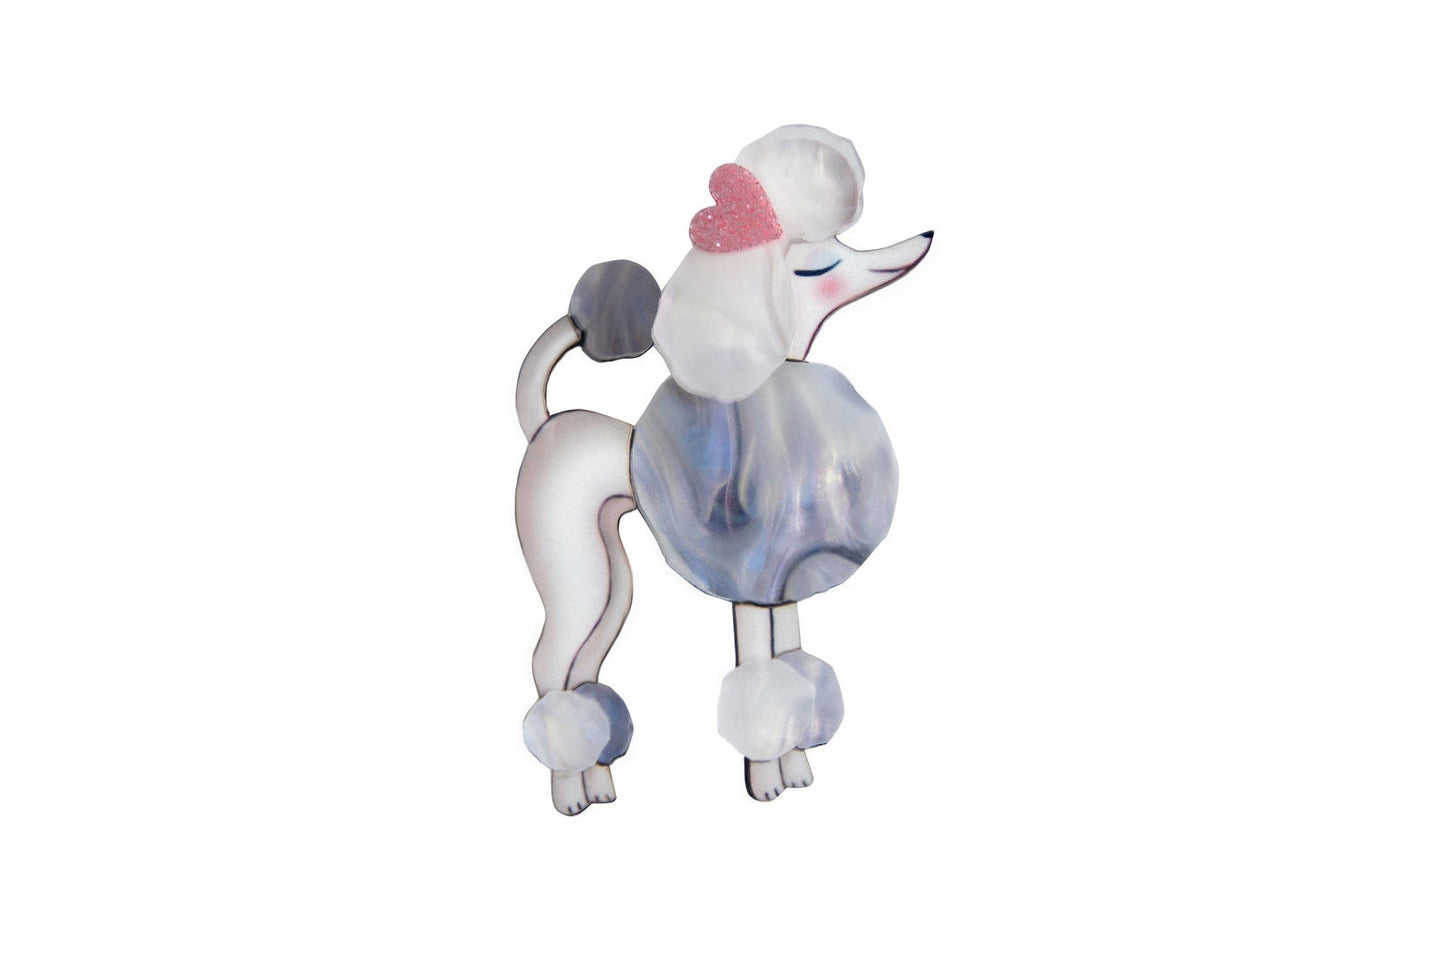 LaliBlue acrylic Poodle Brooch cute retro vintage style Valentine's Day